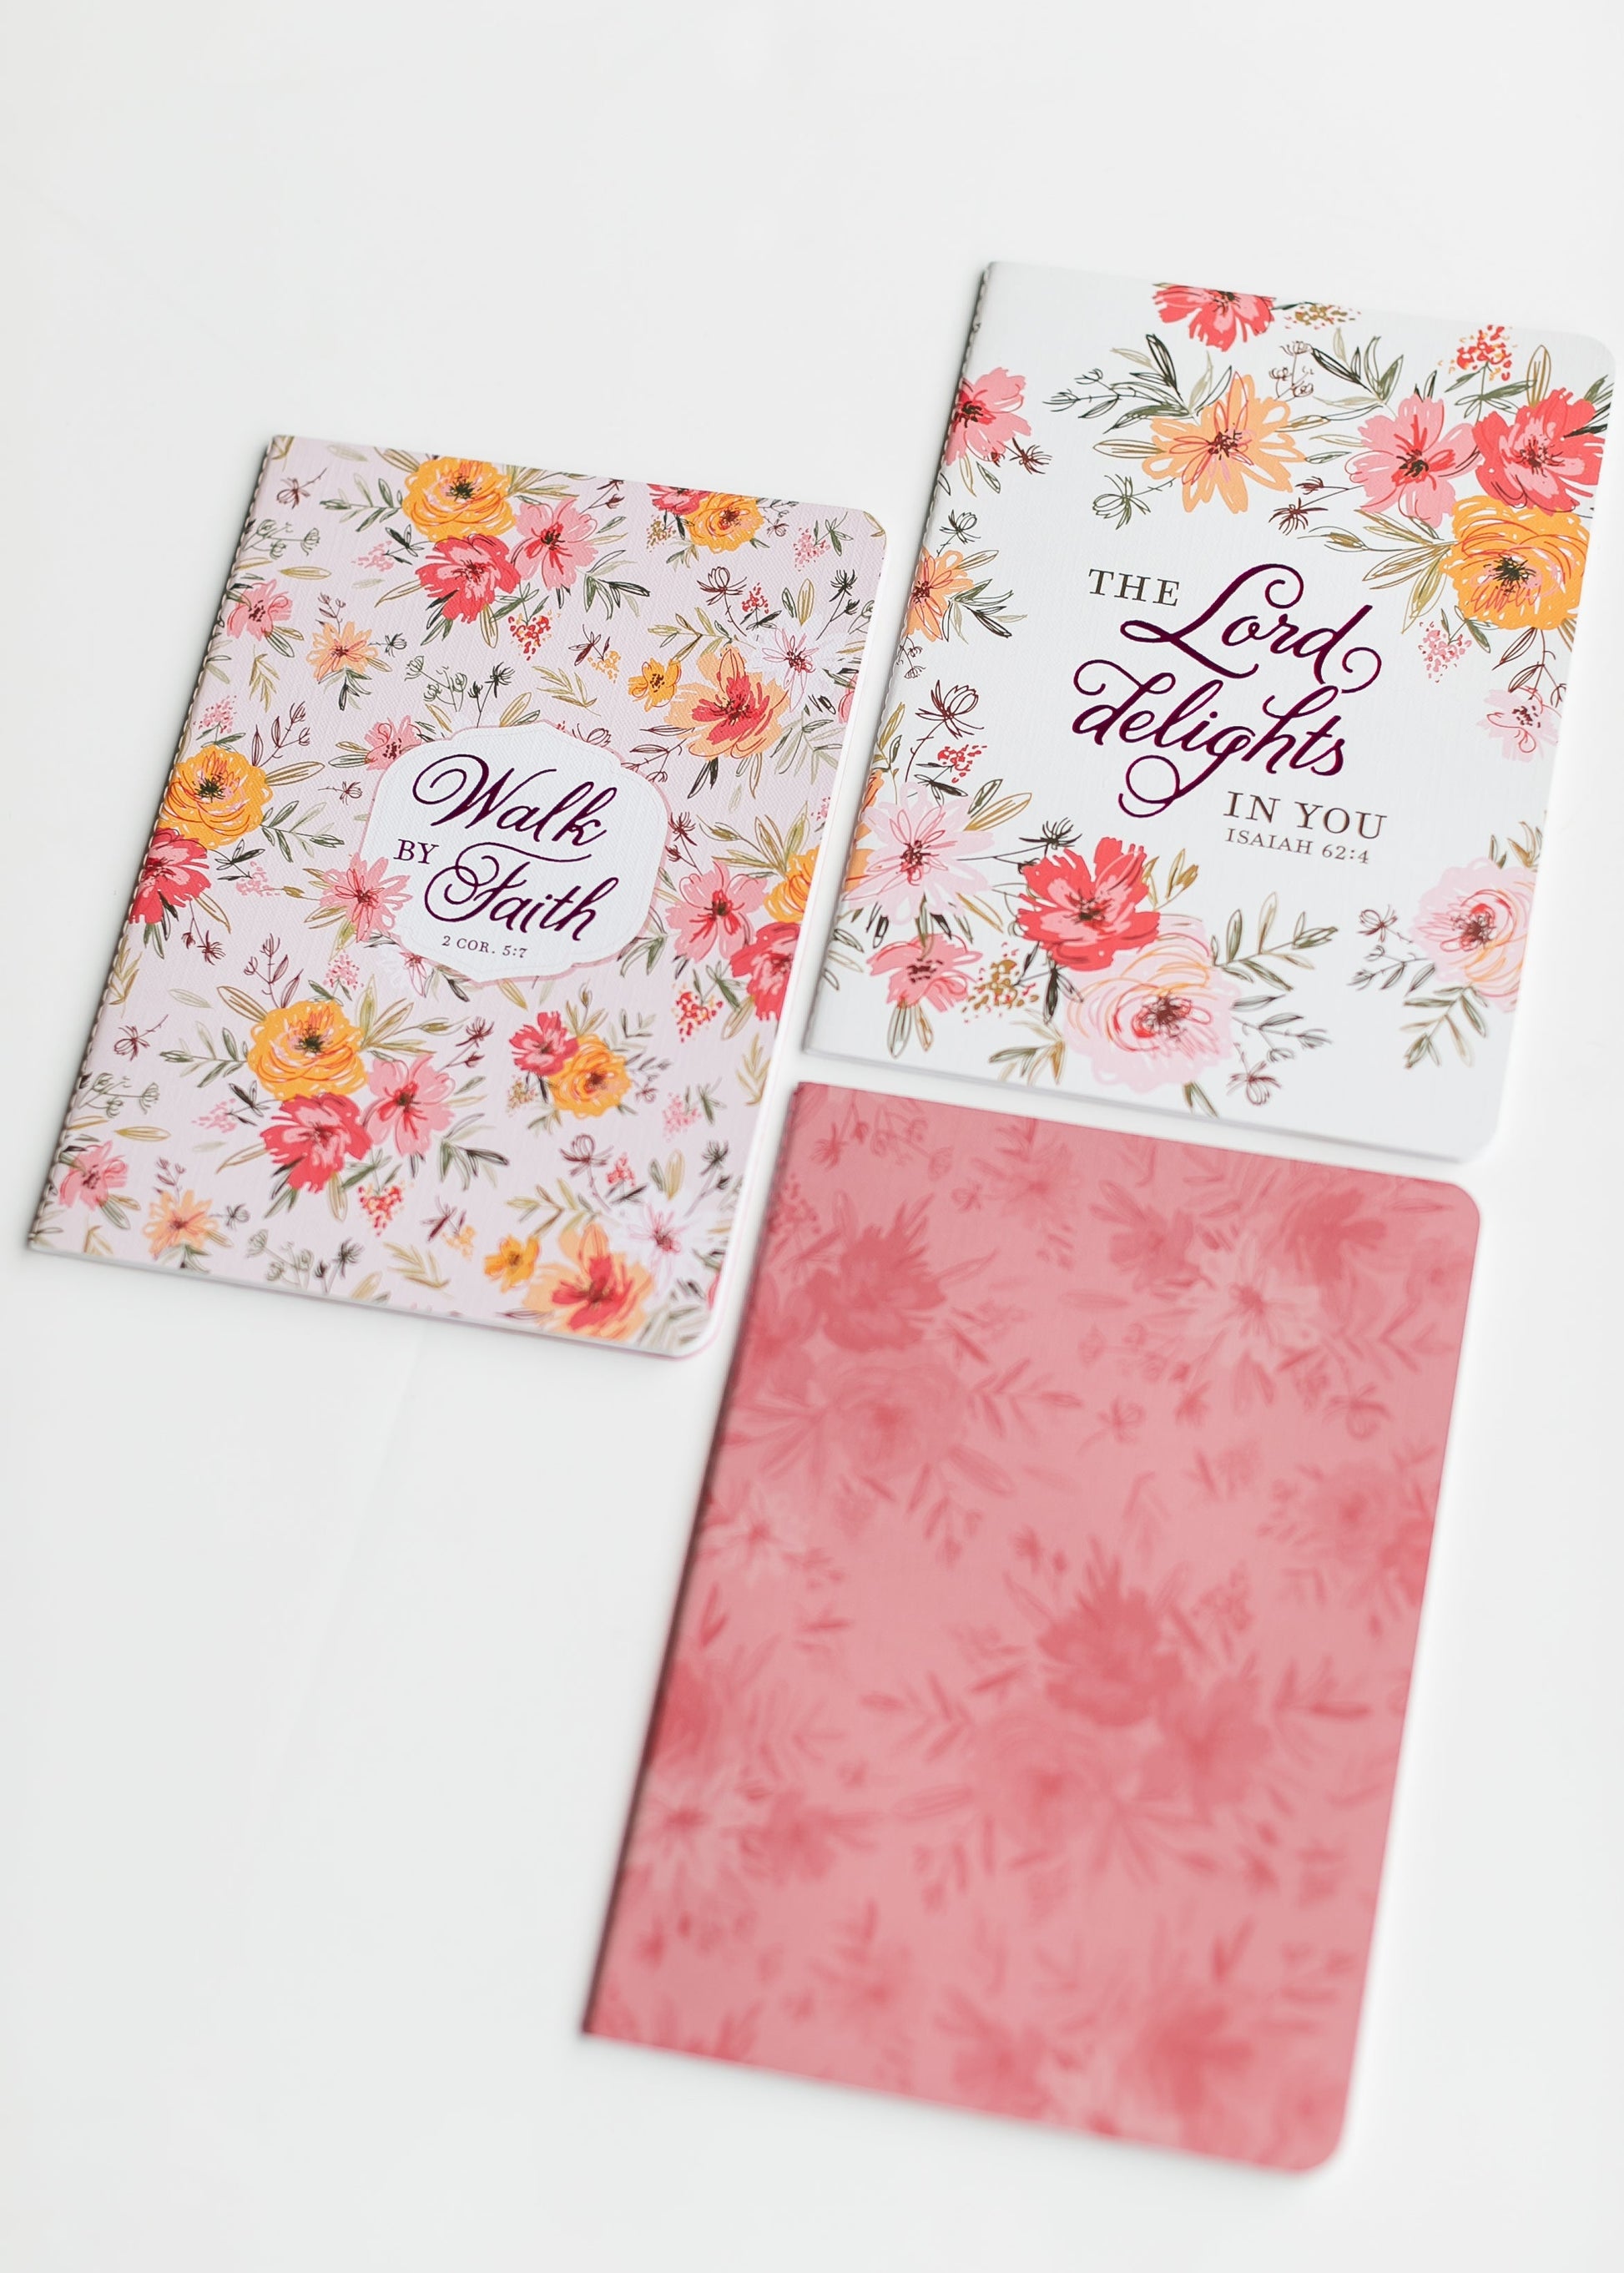 Walk by Faith Large Notebook Set Gifts